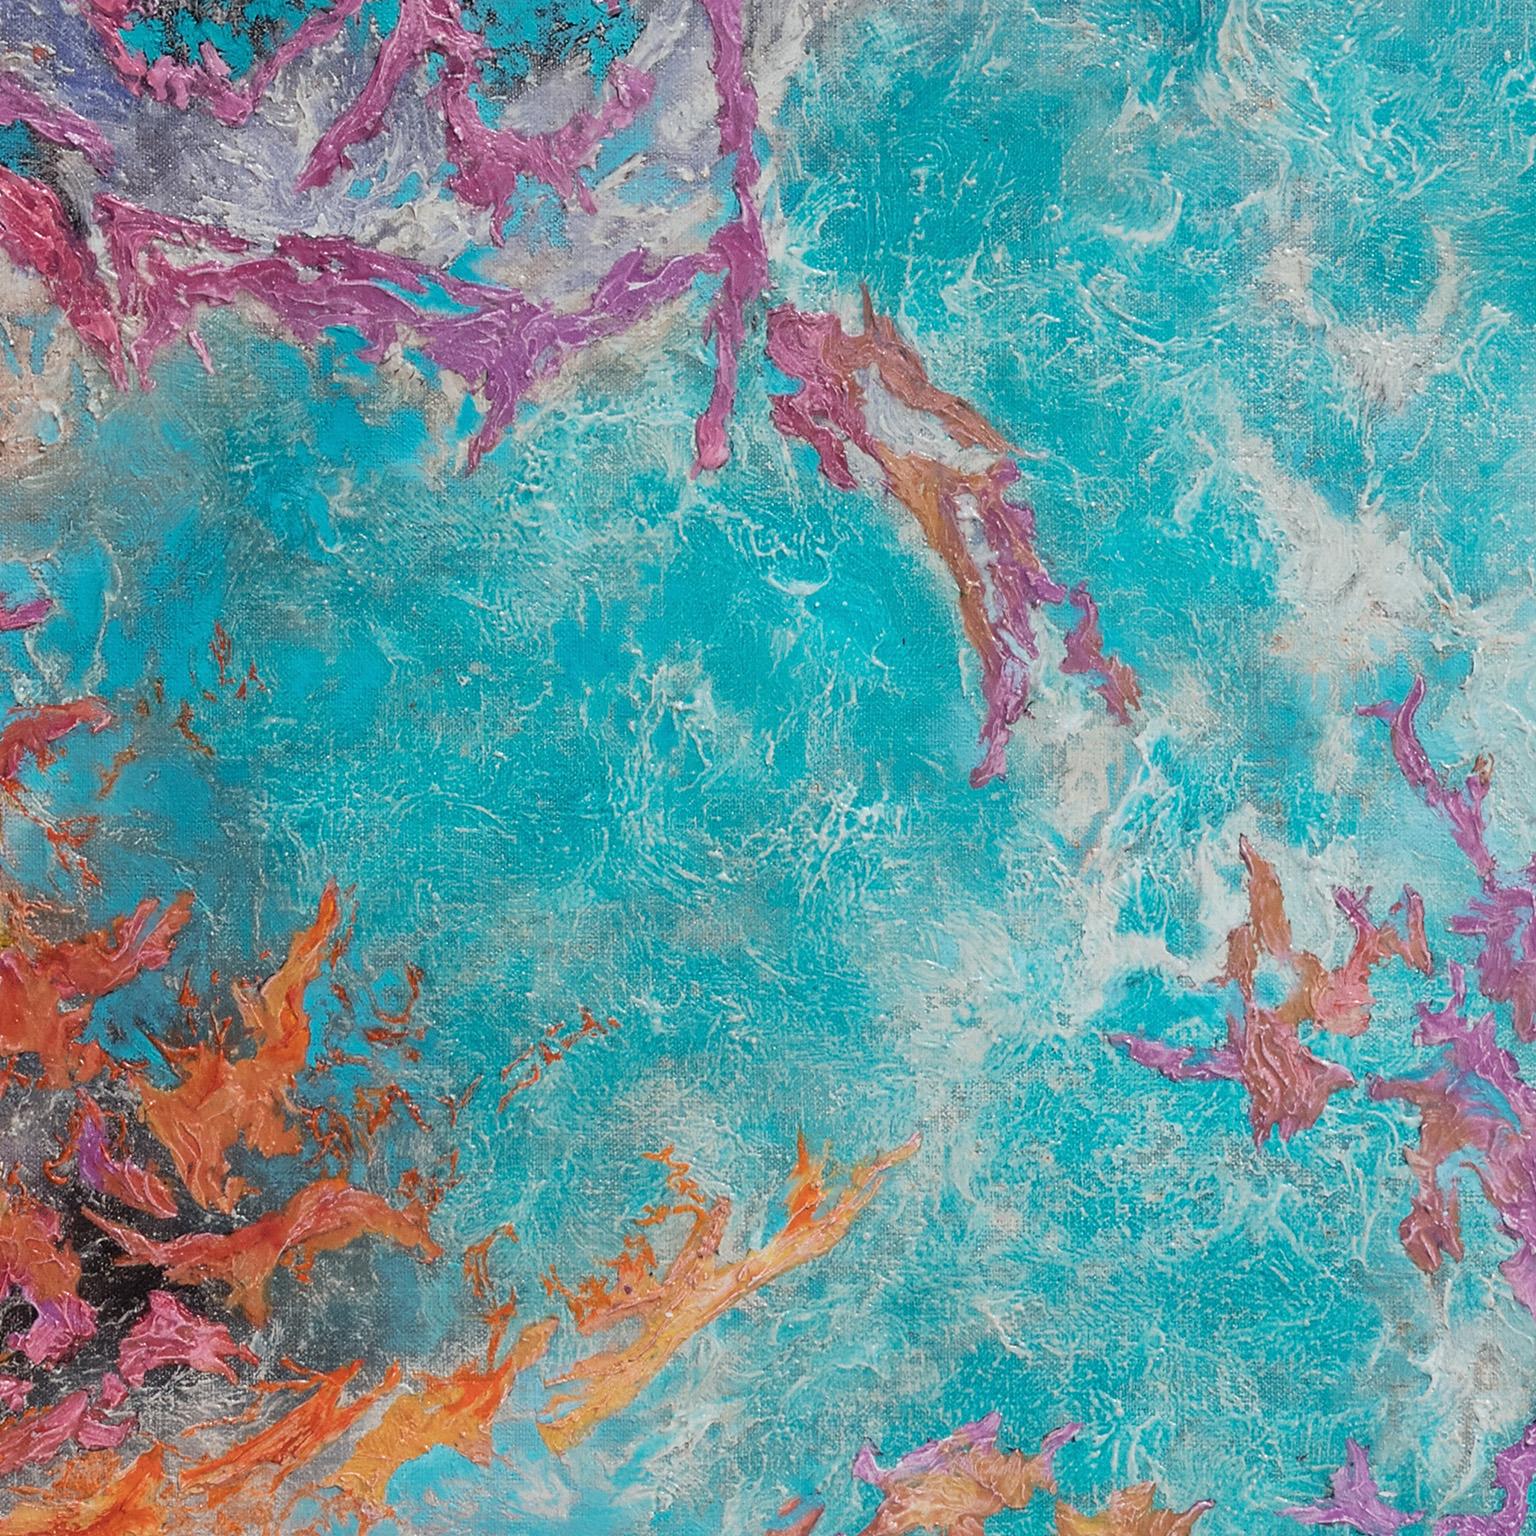 Battle of Colors - Abstract Expressionist Painting, Orange, Turquoise, Purple For Sale 3